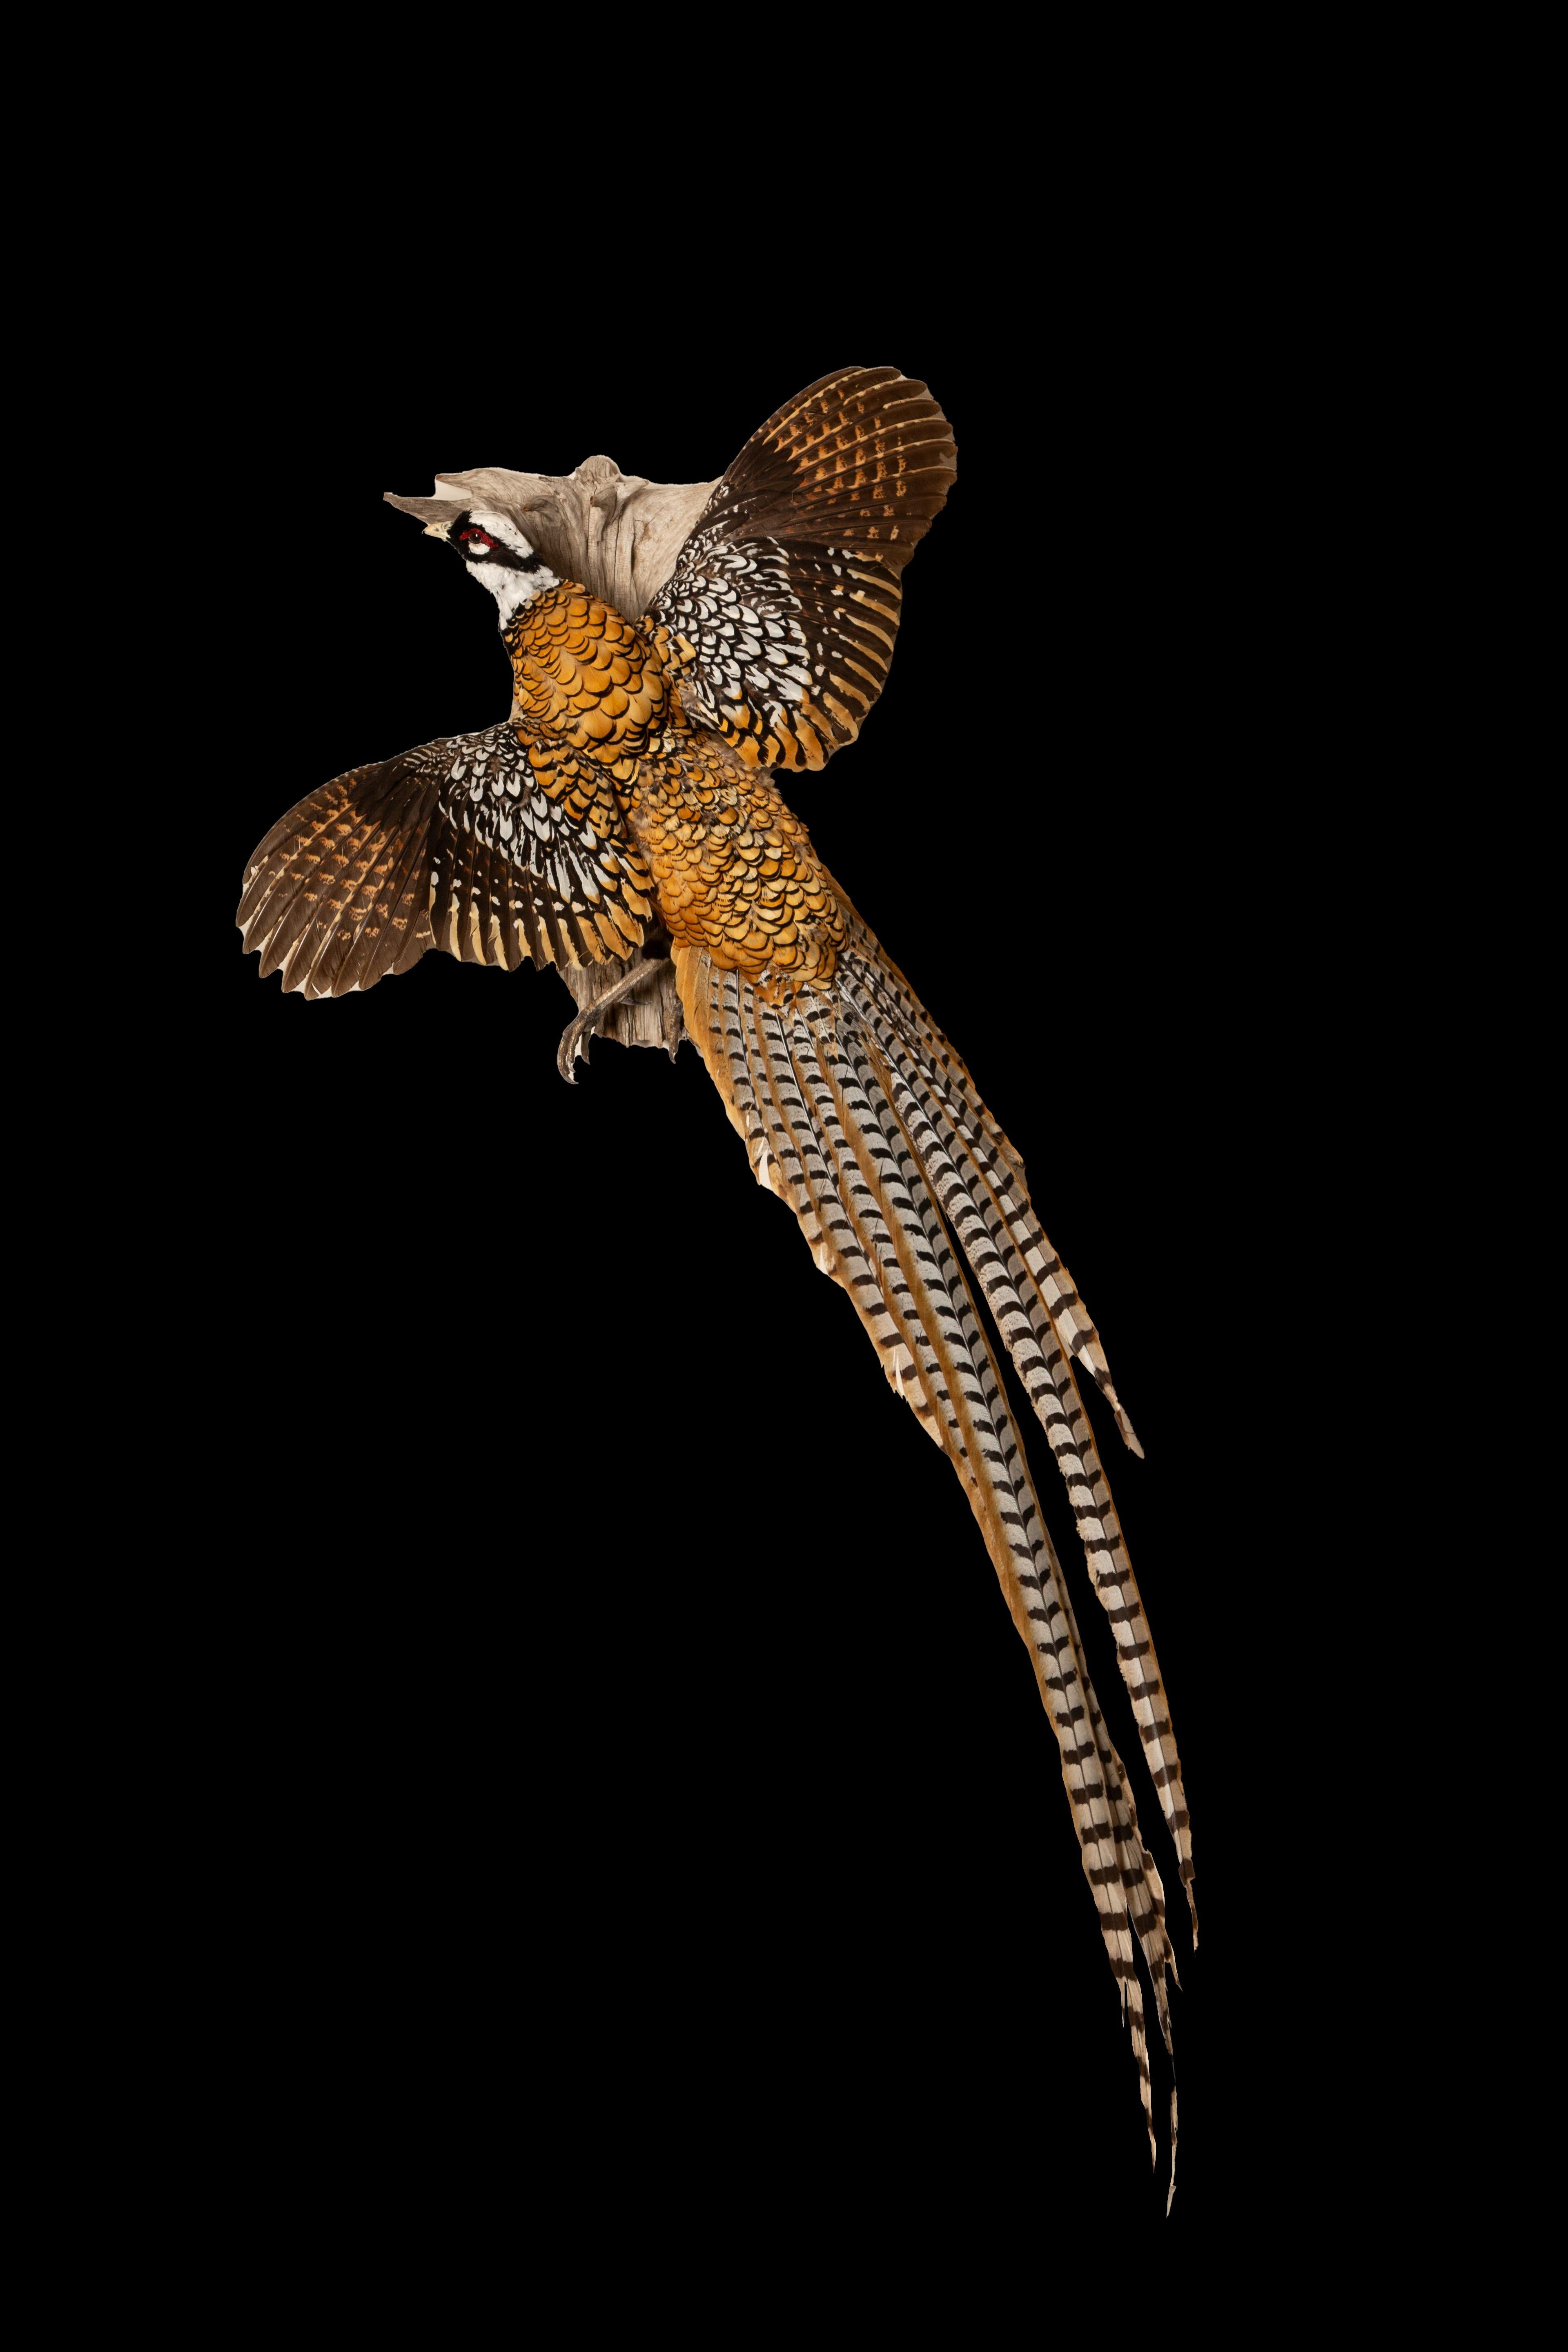  Majestic  Flying Reeves's Pheasant (Syrmaticus reevesii), a stunning avian specimen native to China, meticulously preserved to capture its intricate beauty and remarkable history. Named in honor of the renowned British naturalist John Reeves, who